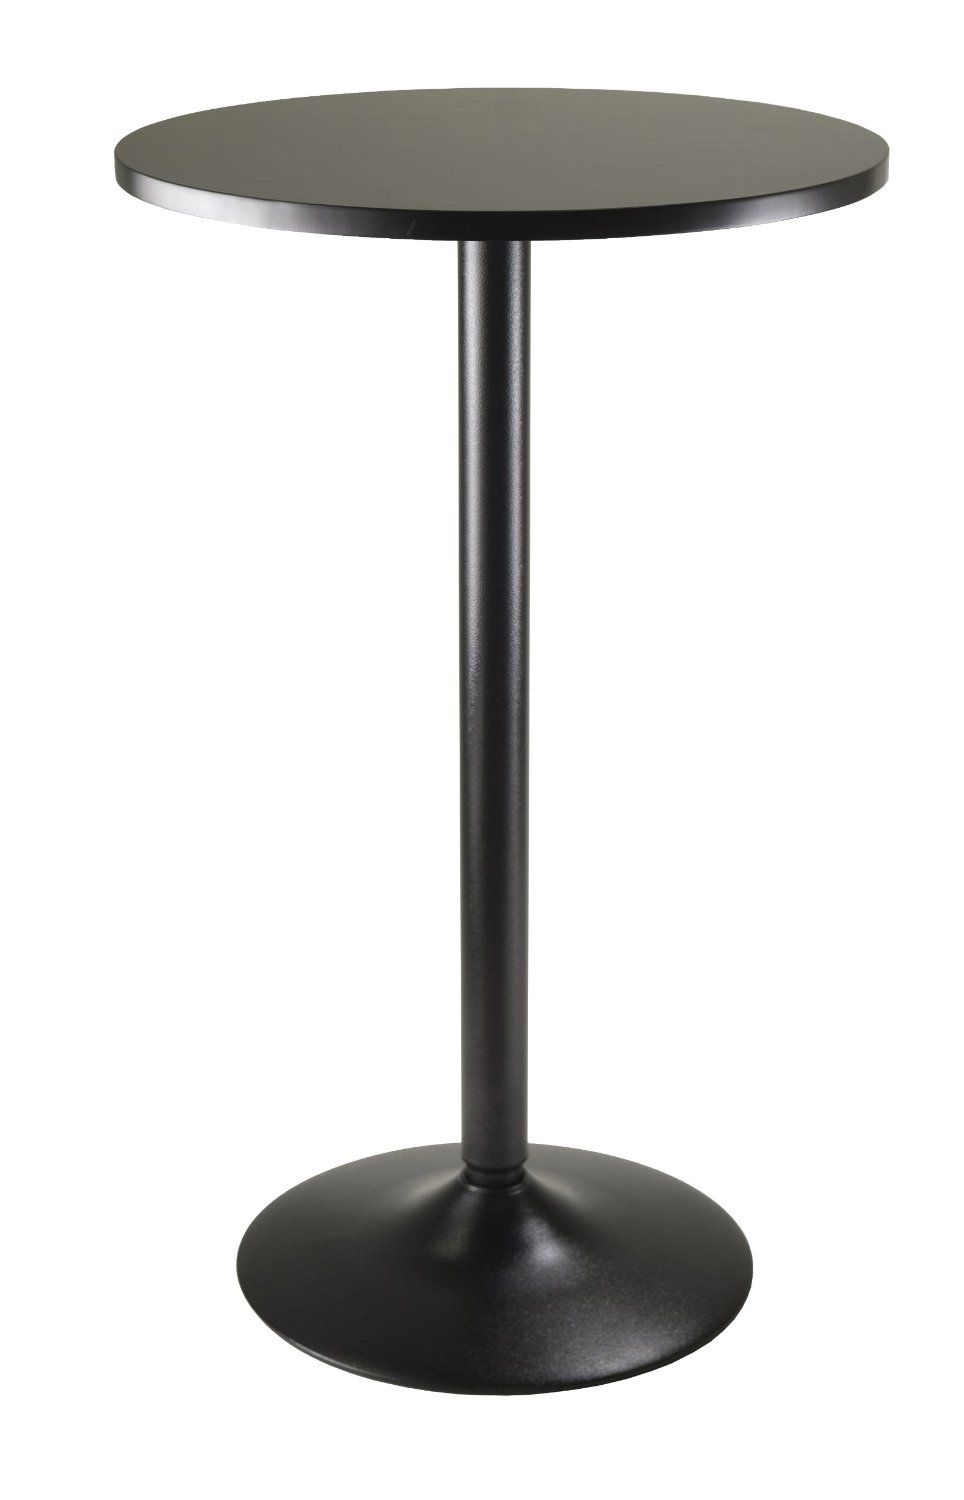 Winsome Obsidian Pub Table Round Black (View 3 of 10)